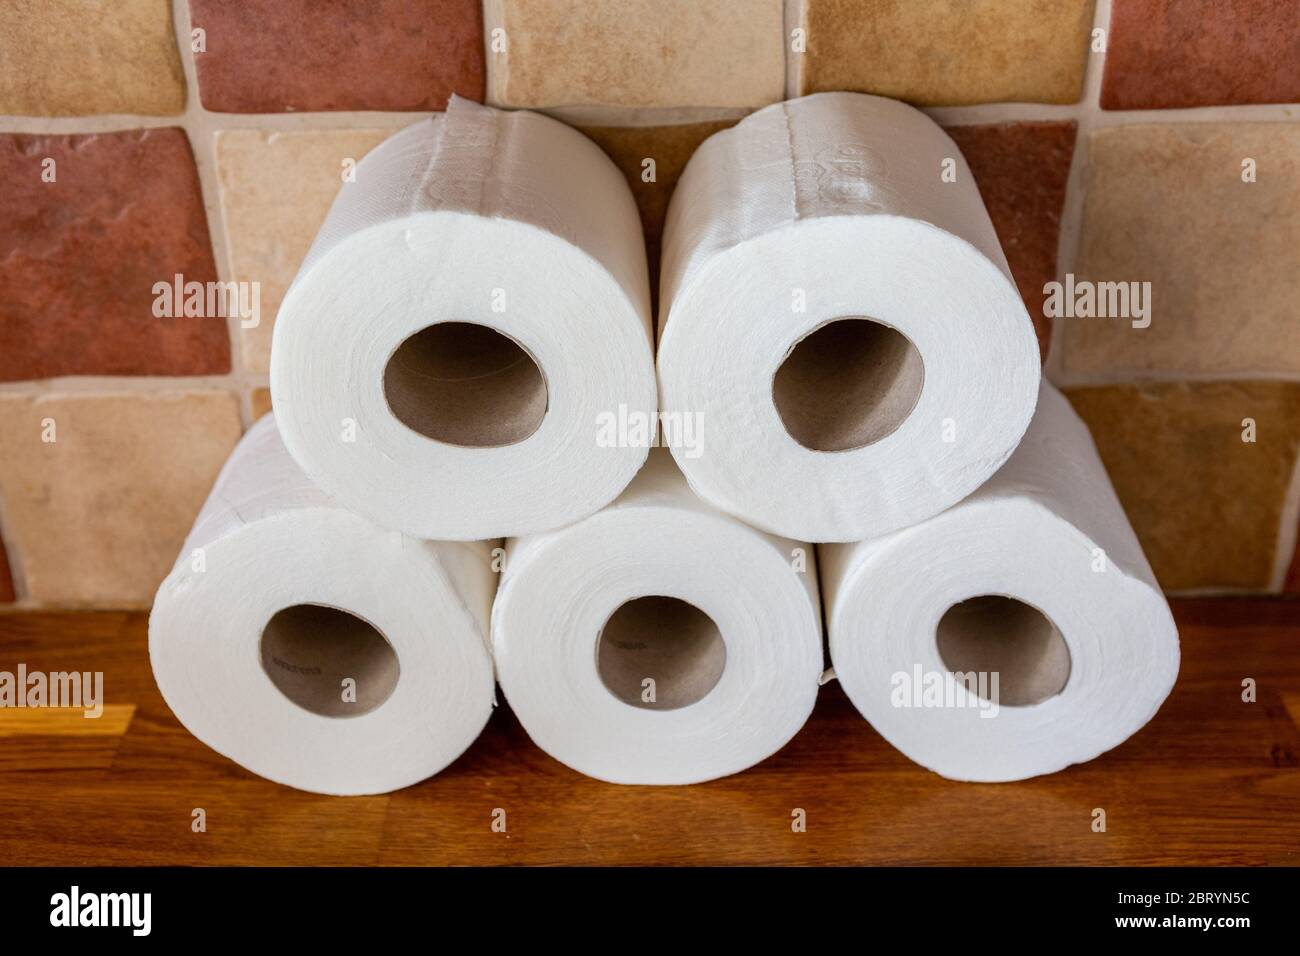 Toilet rolls, a stack of toilet paper Stock Photo - Alamy